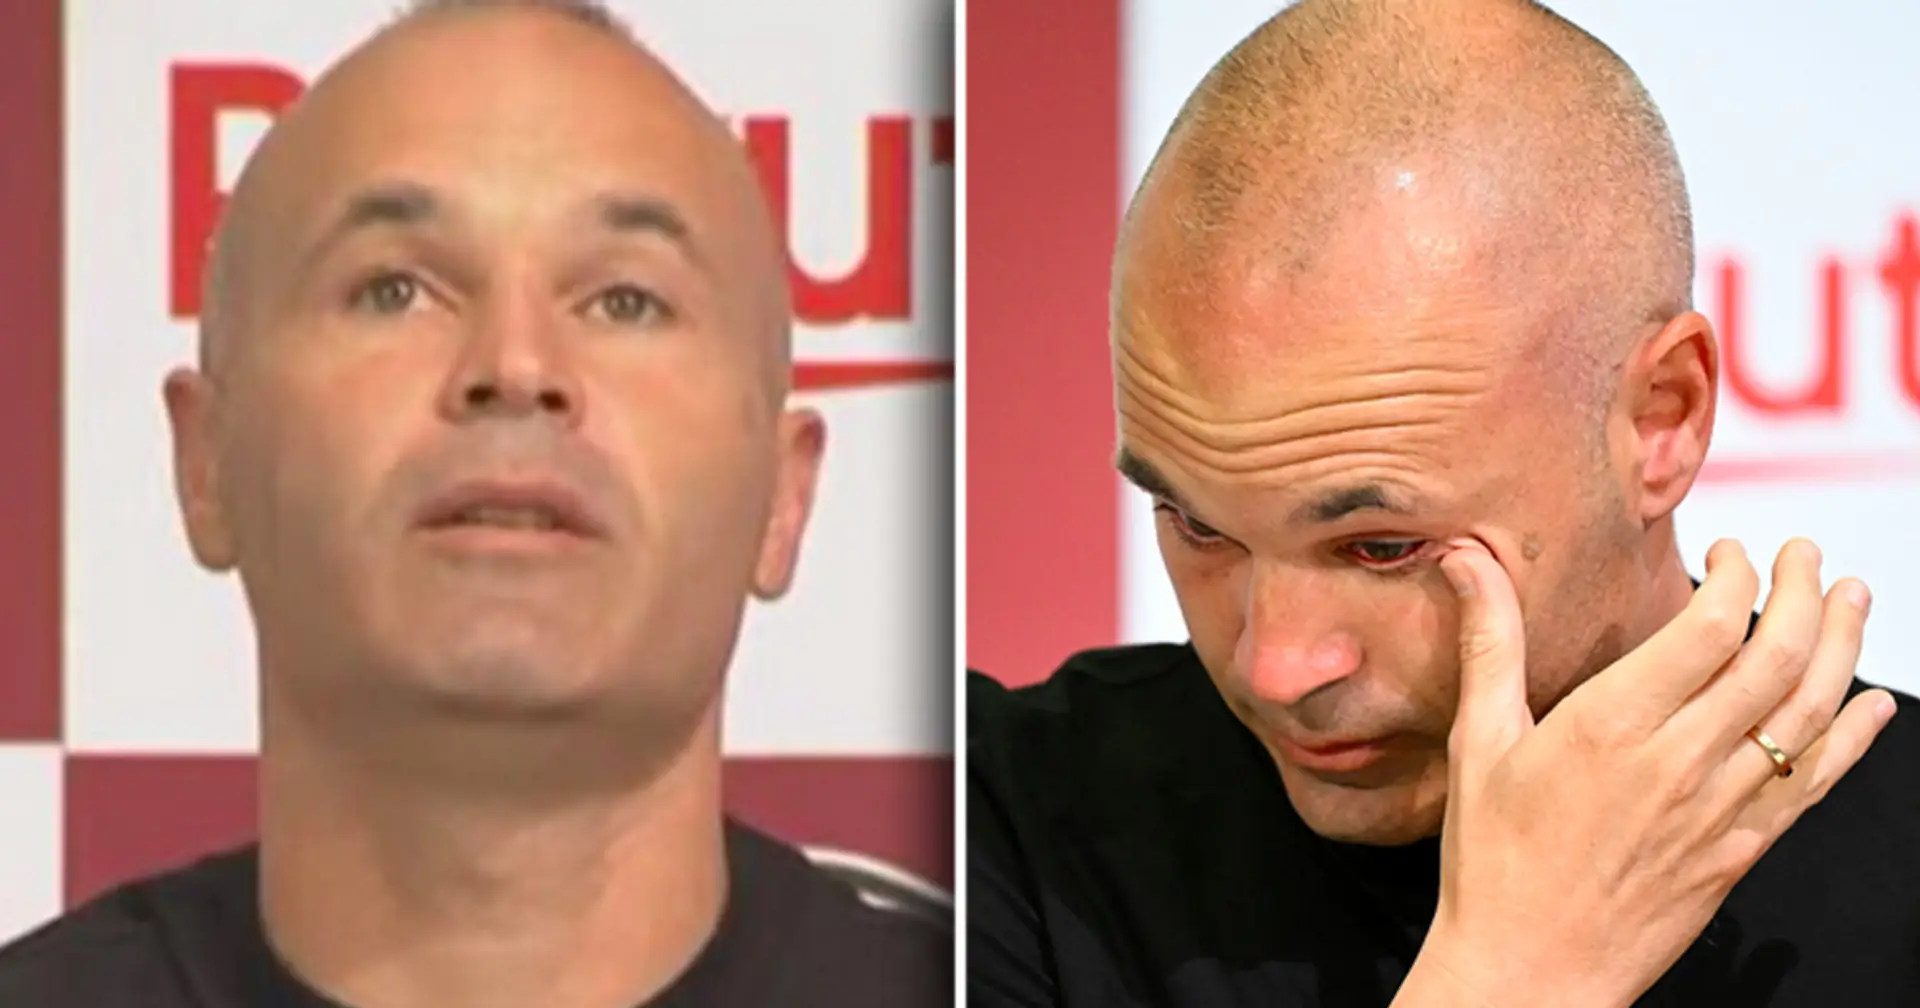 Iniesta officially leaves Vissel Kobe, sheds light on his future